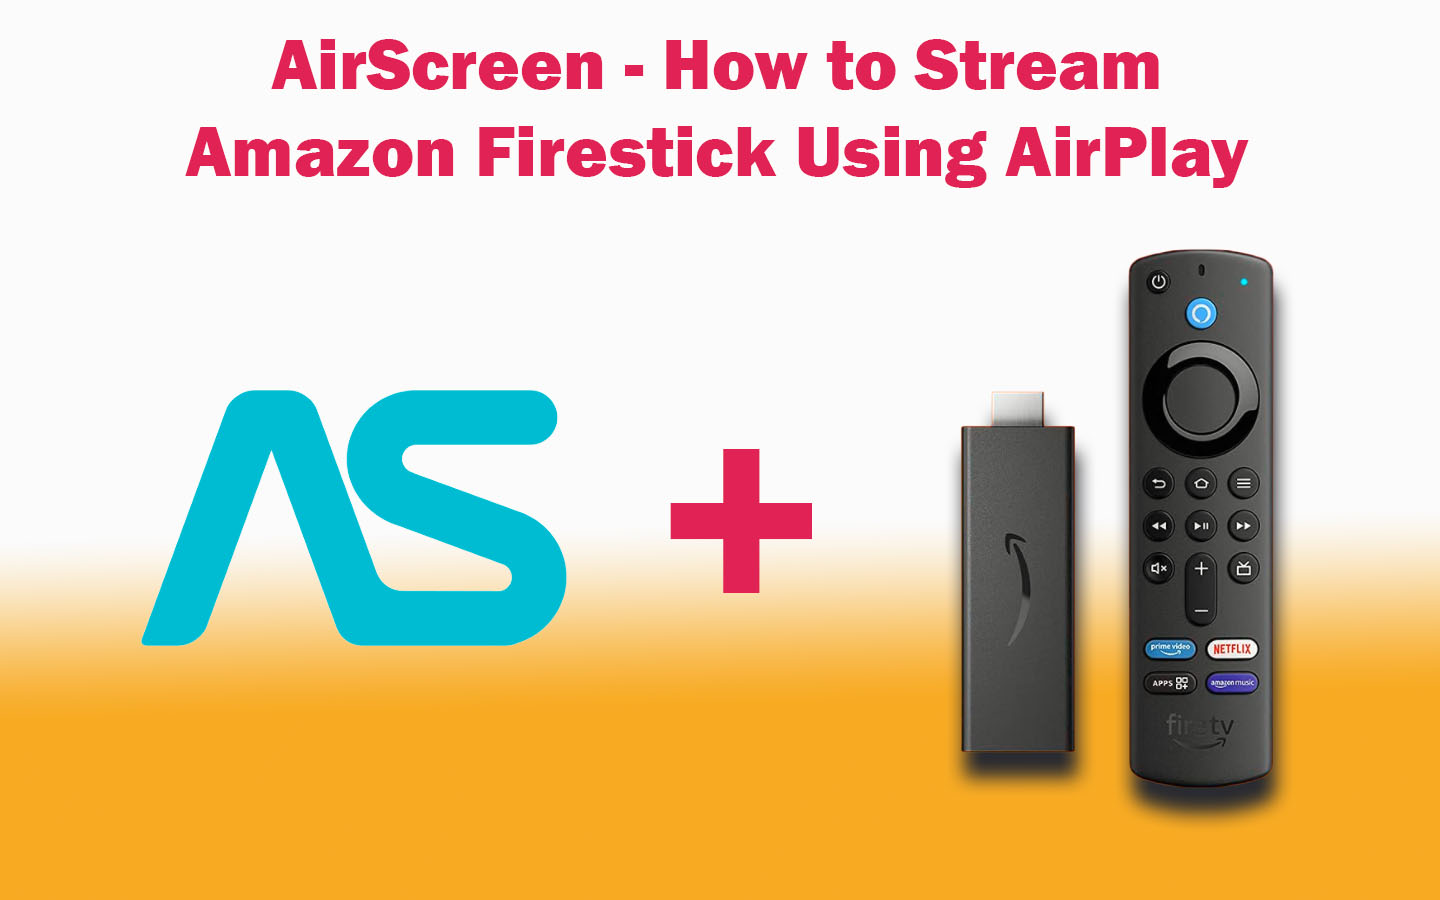 AirScreen - How to Stream Amazon Firestick Using AirPlay